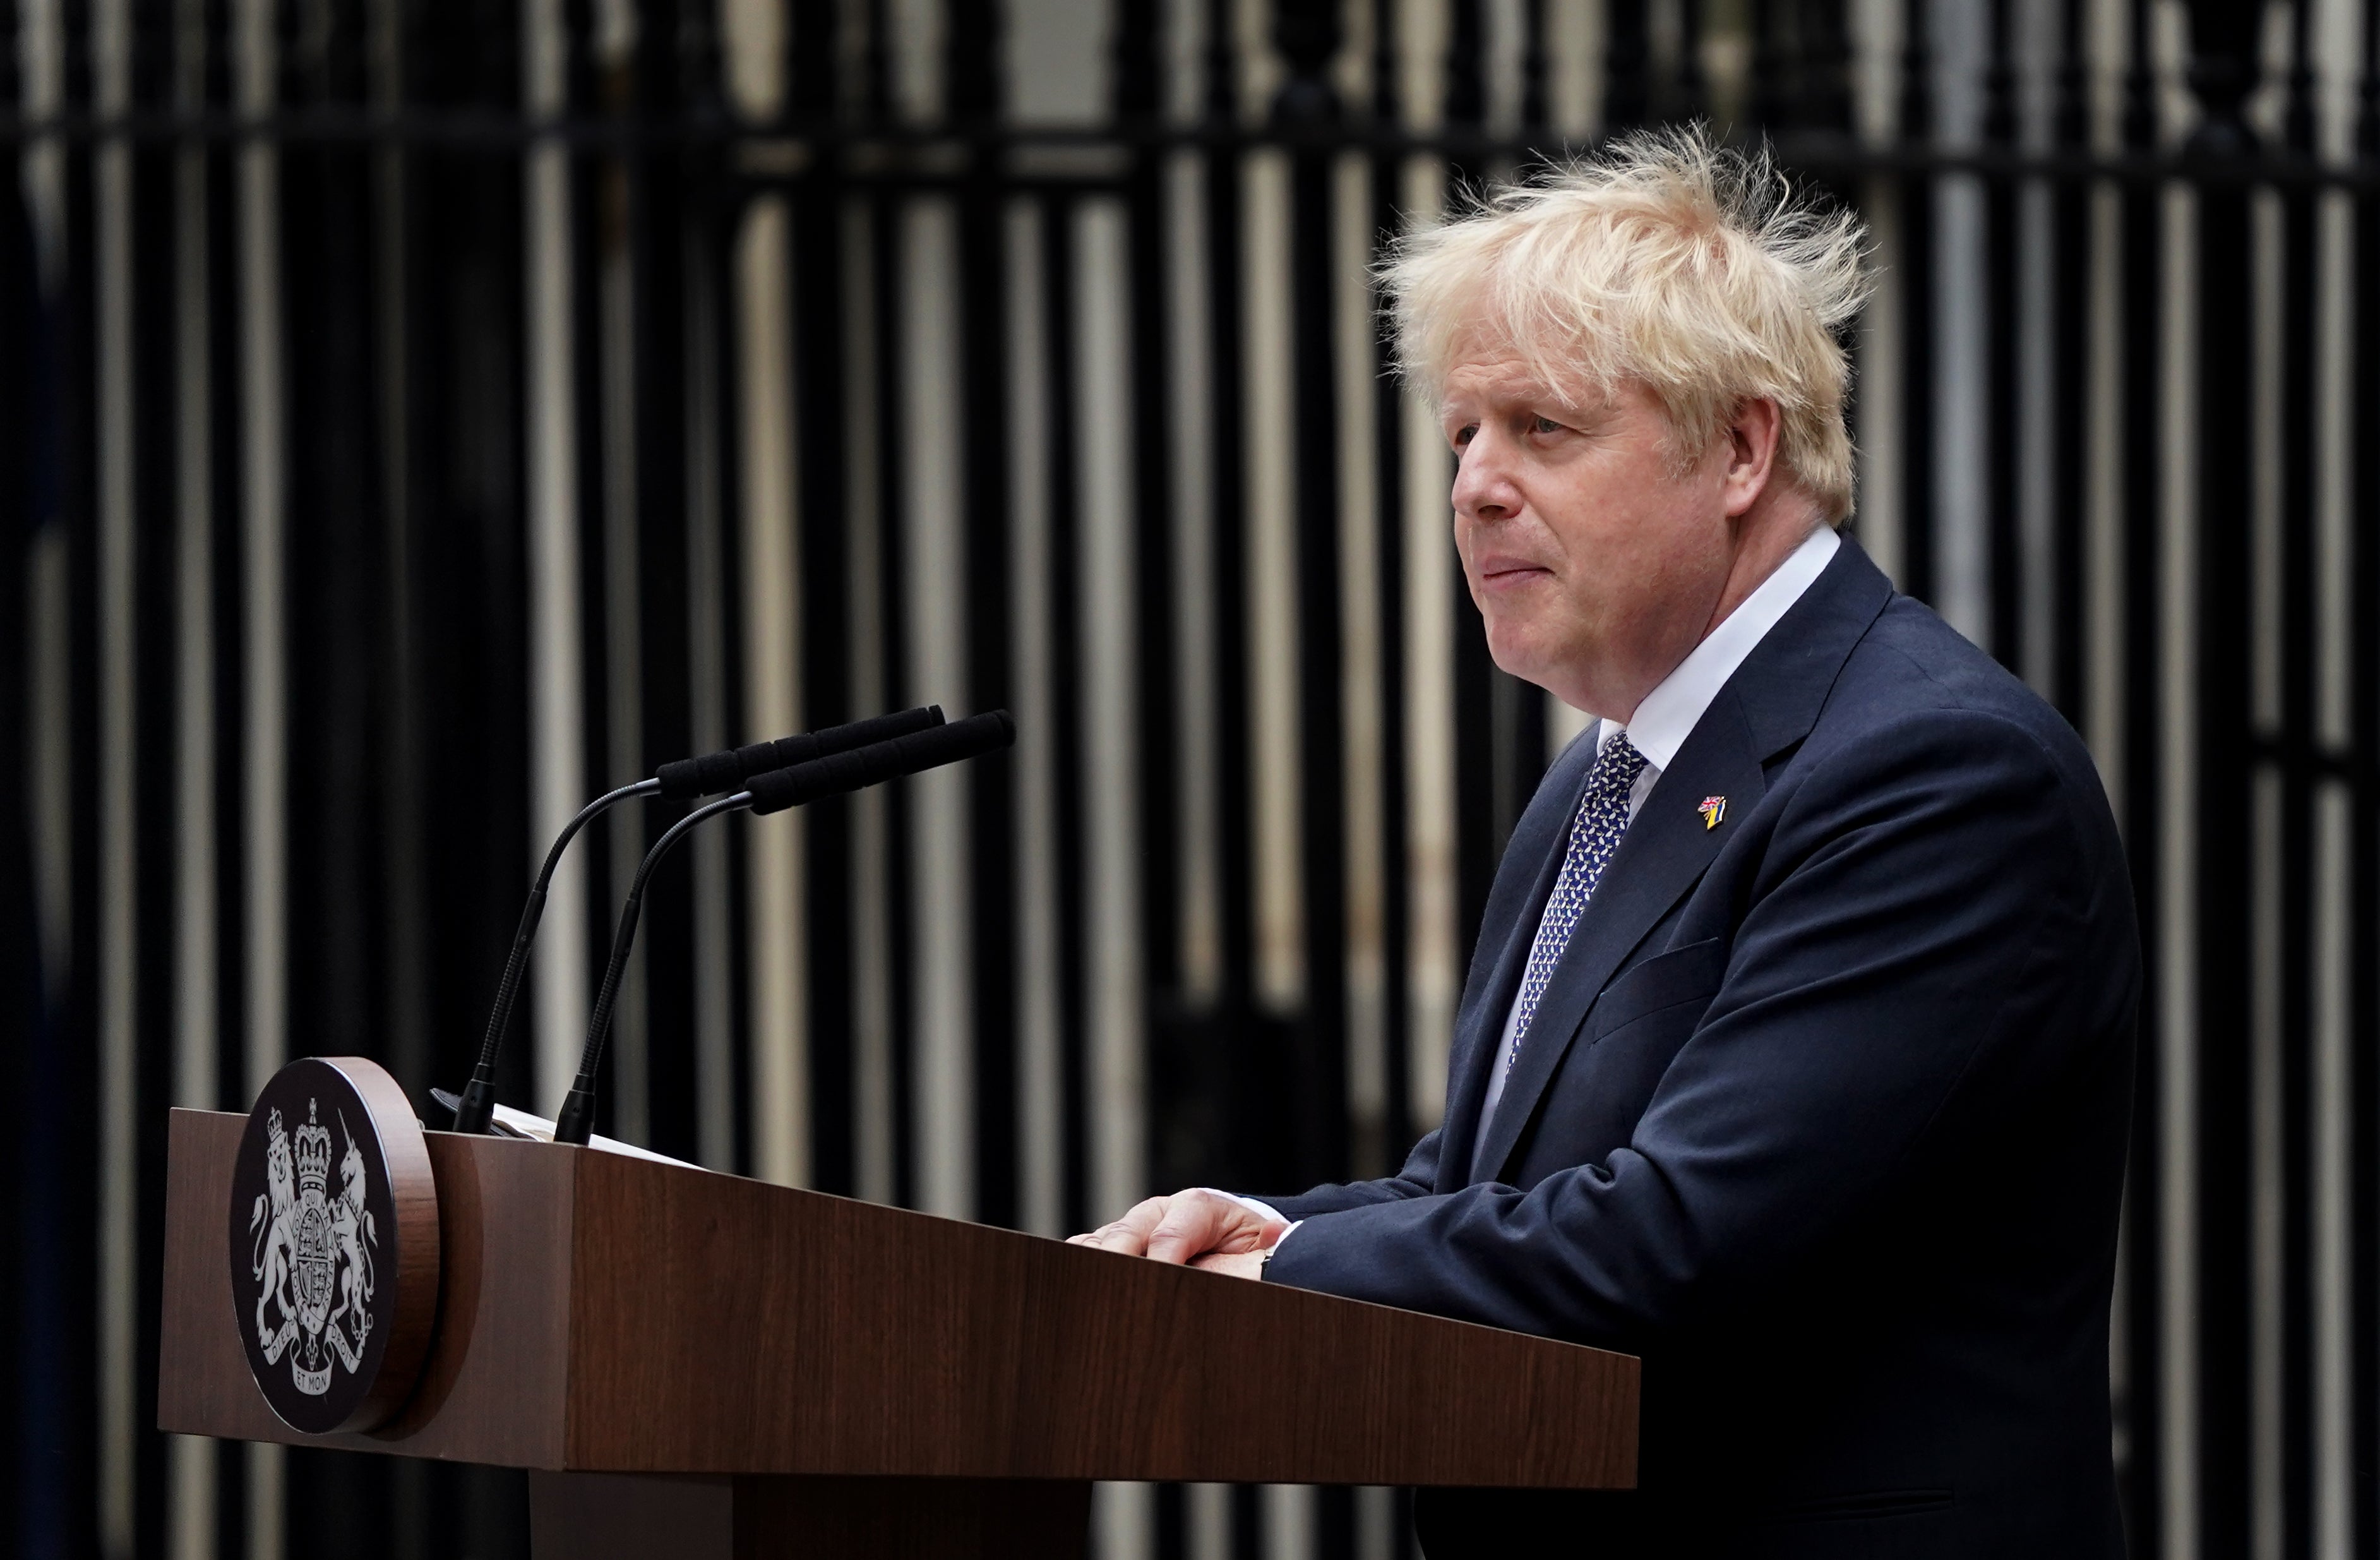 Boris Johnson has said he will stay on until a new Tory leader is elected (Gareth Fuller/PA)